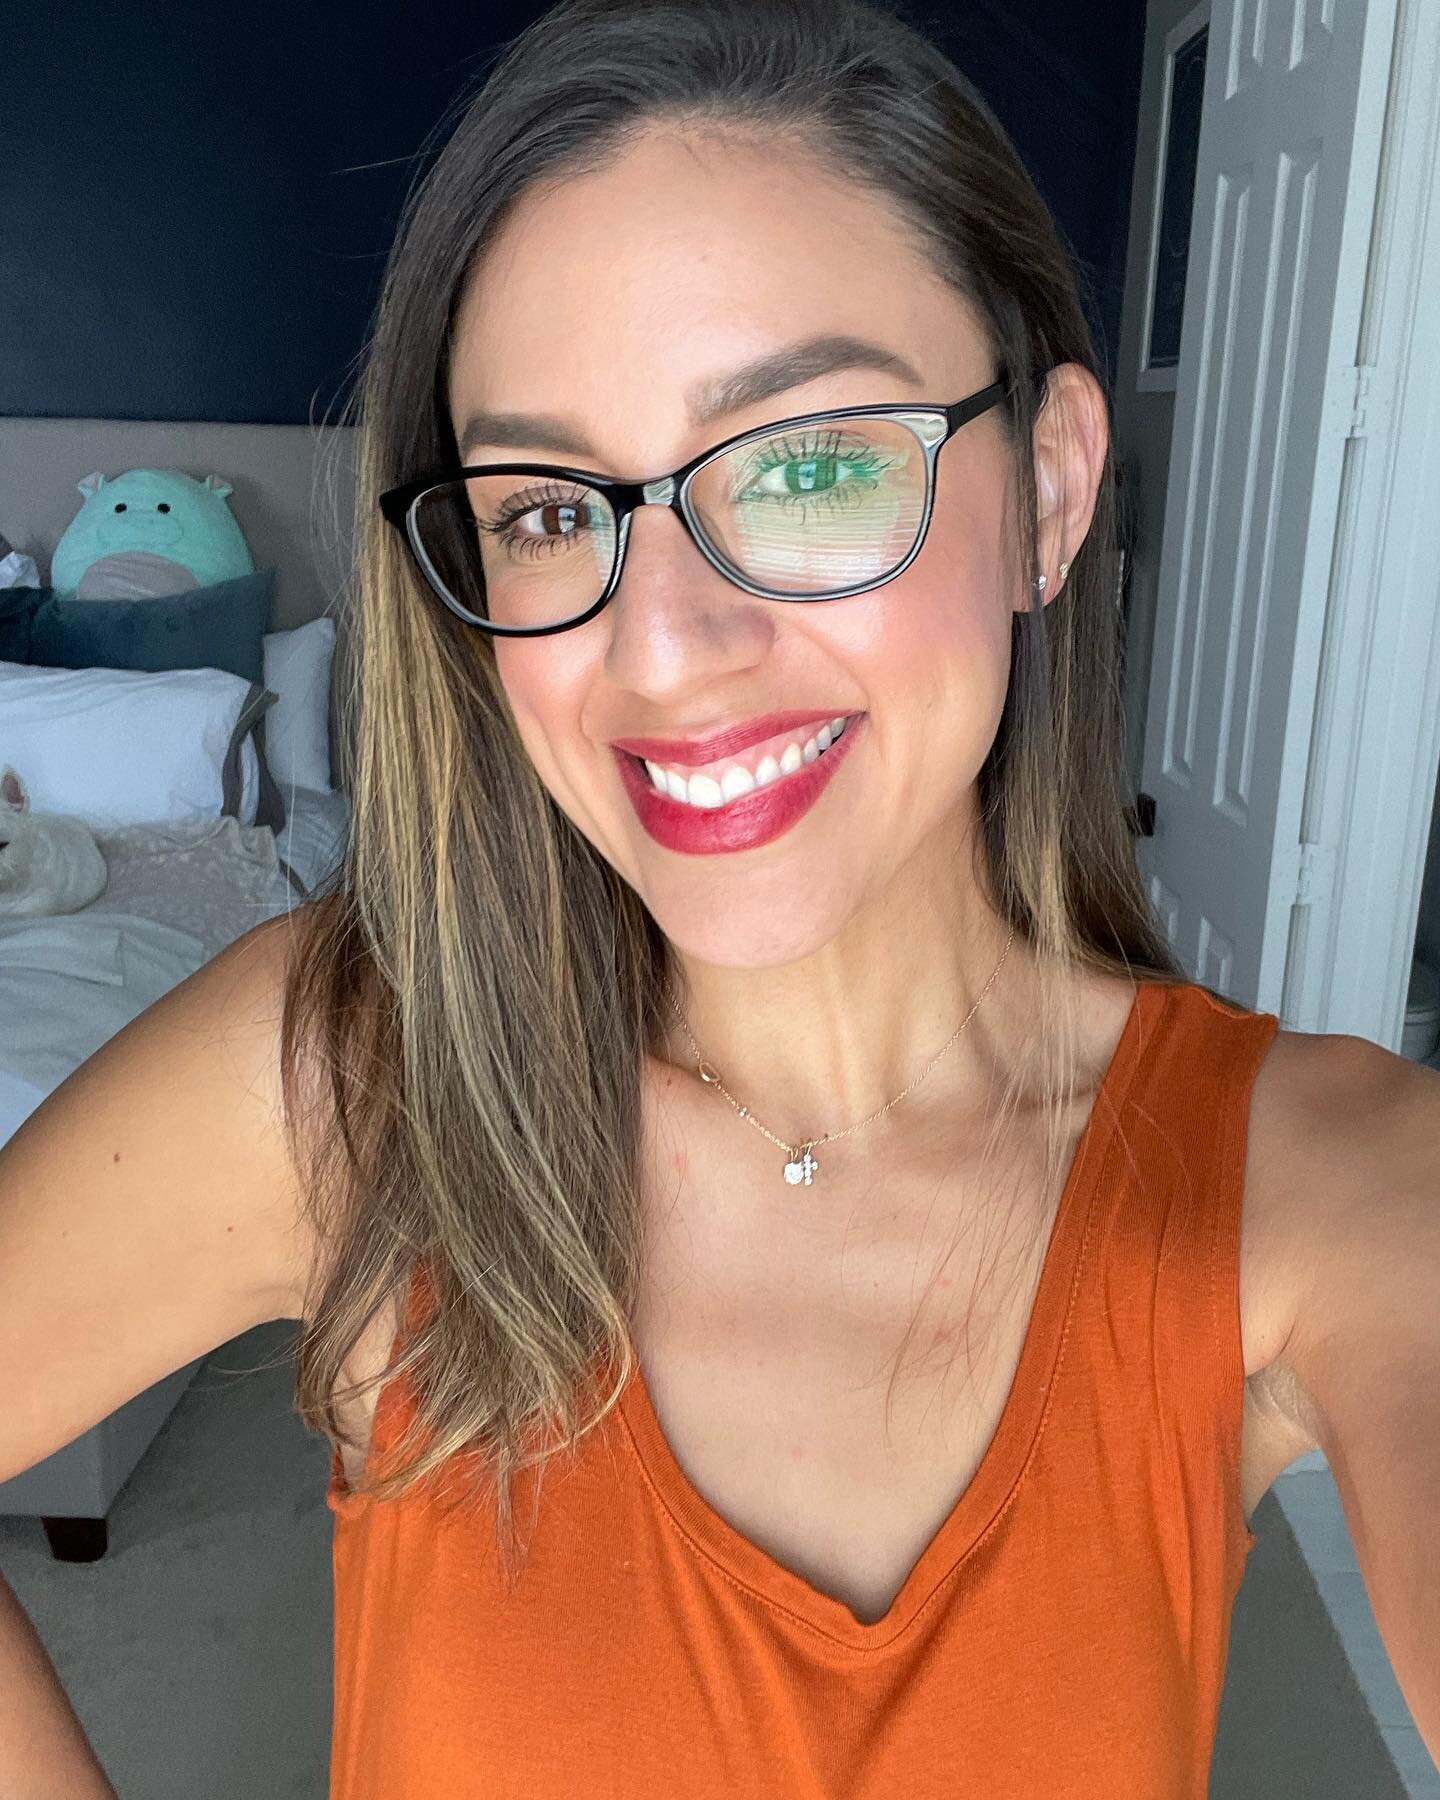 Hi! Hello! Happy Monday! Can you guys do me a favor and please remind me to wear my glasses🤓? I can remind you about something if you&rsquo;d like too! Let&rsquo;s be accountability buddies 😂👯&zwj;♀️! I&rsquo;ll tell you a funny story about this o